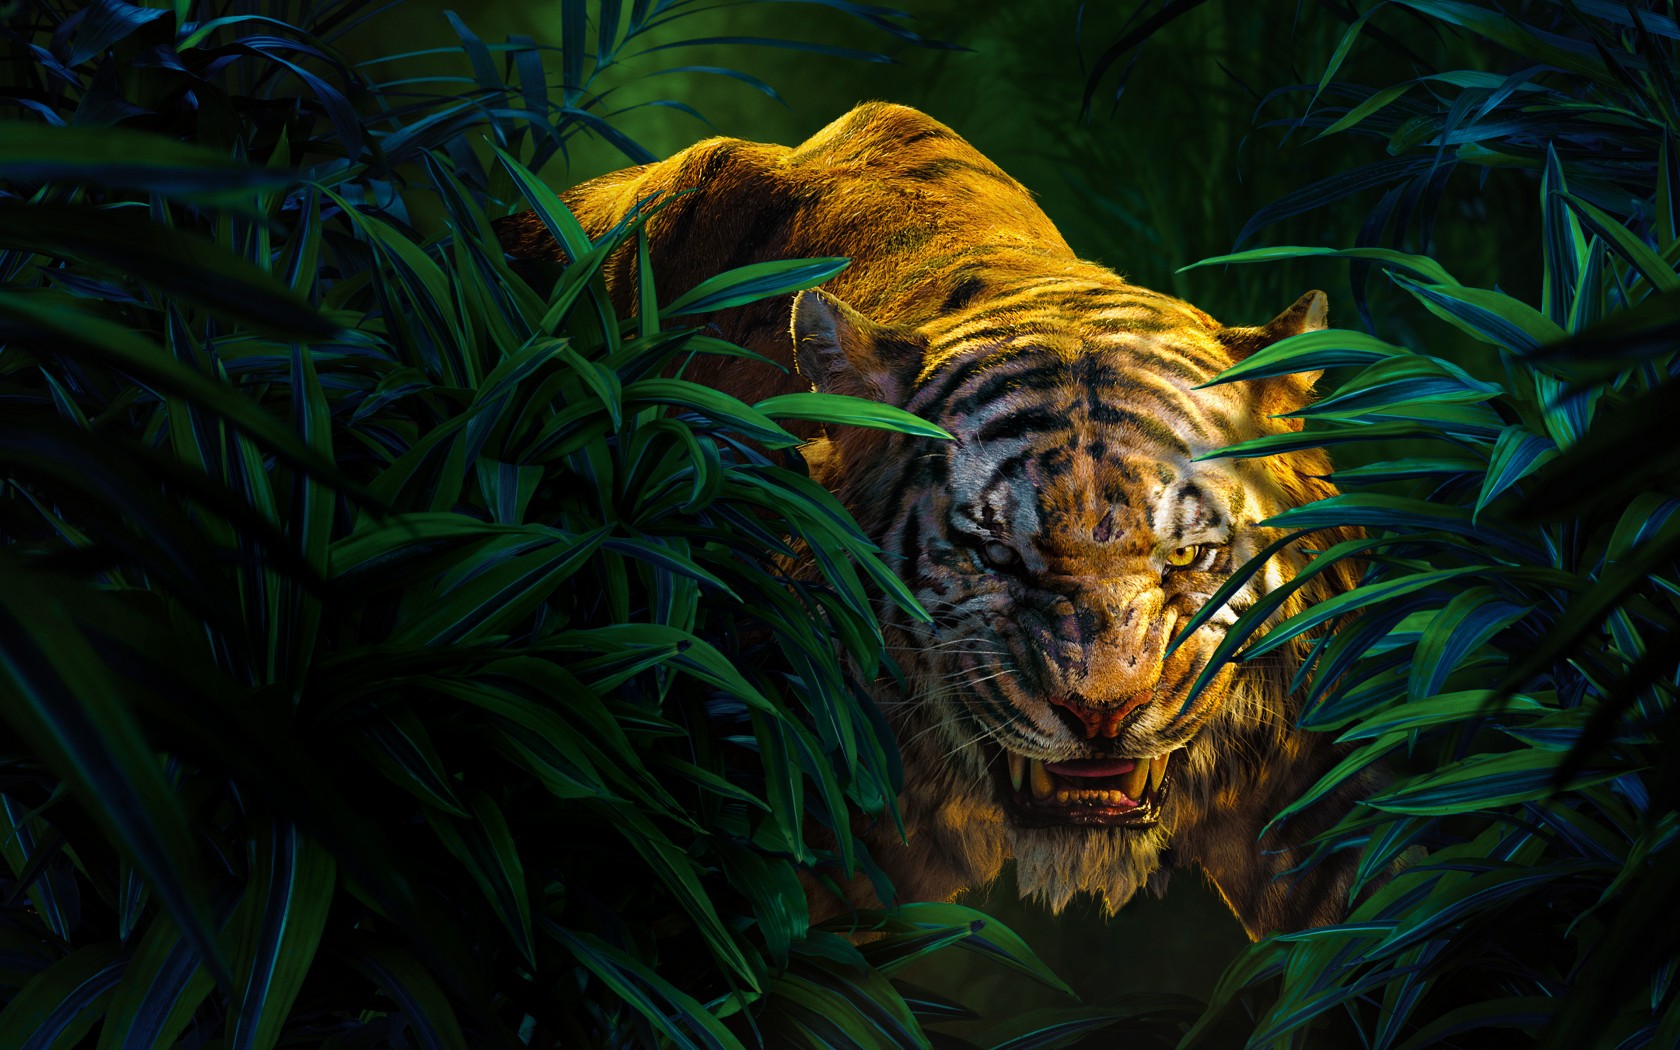 download the last version for mac The Jungle Book